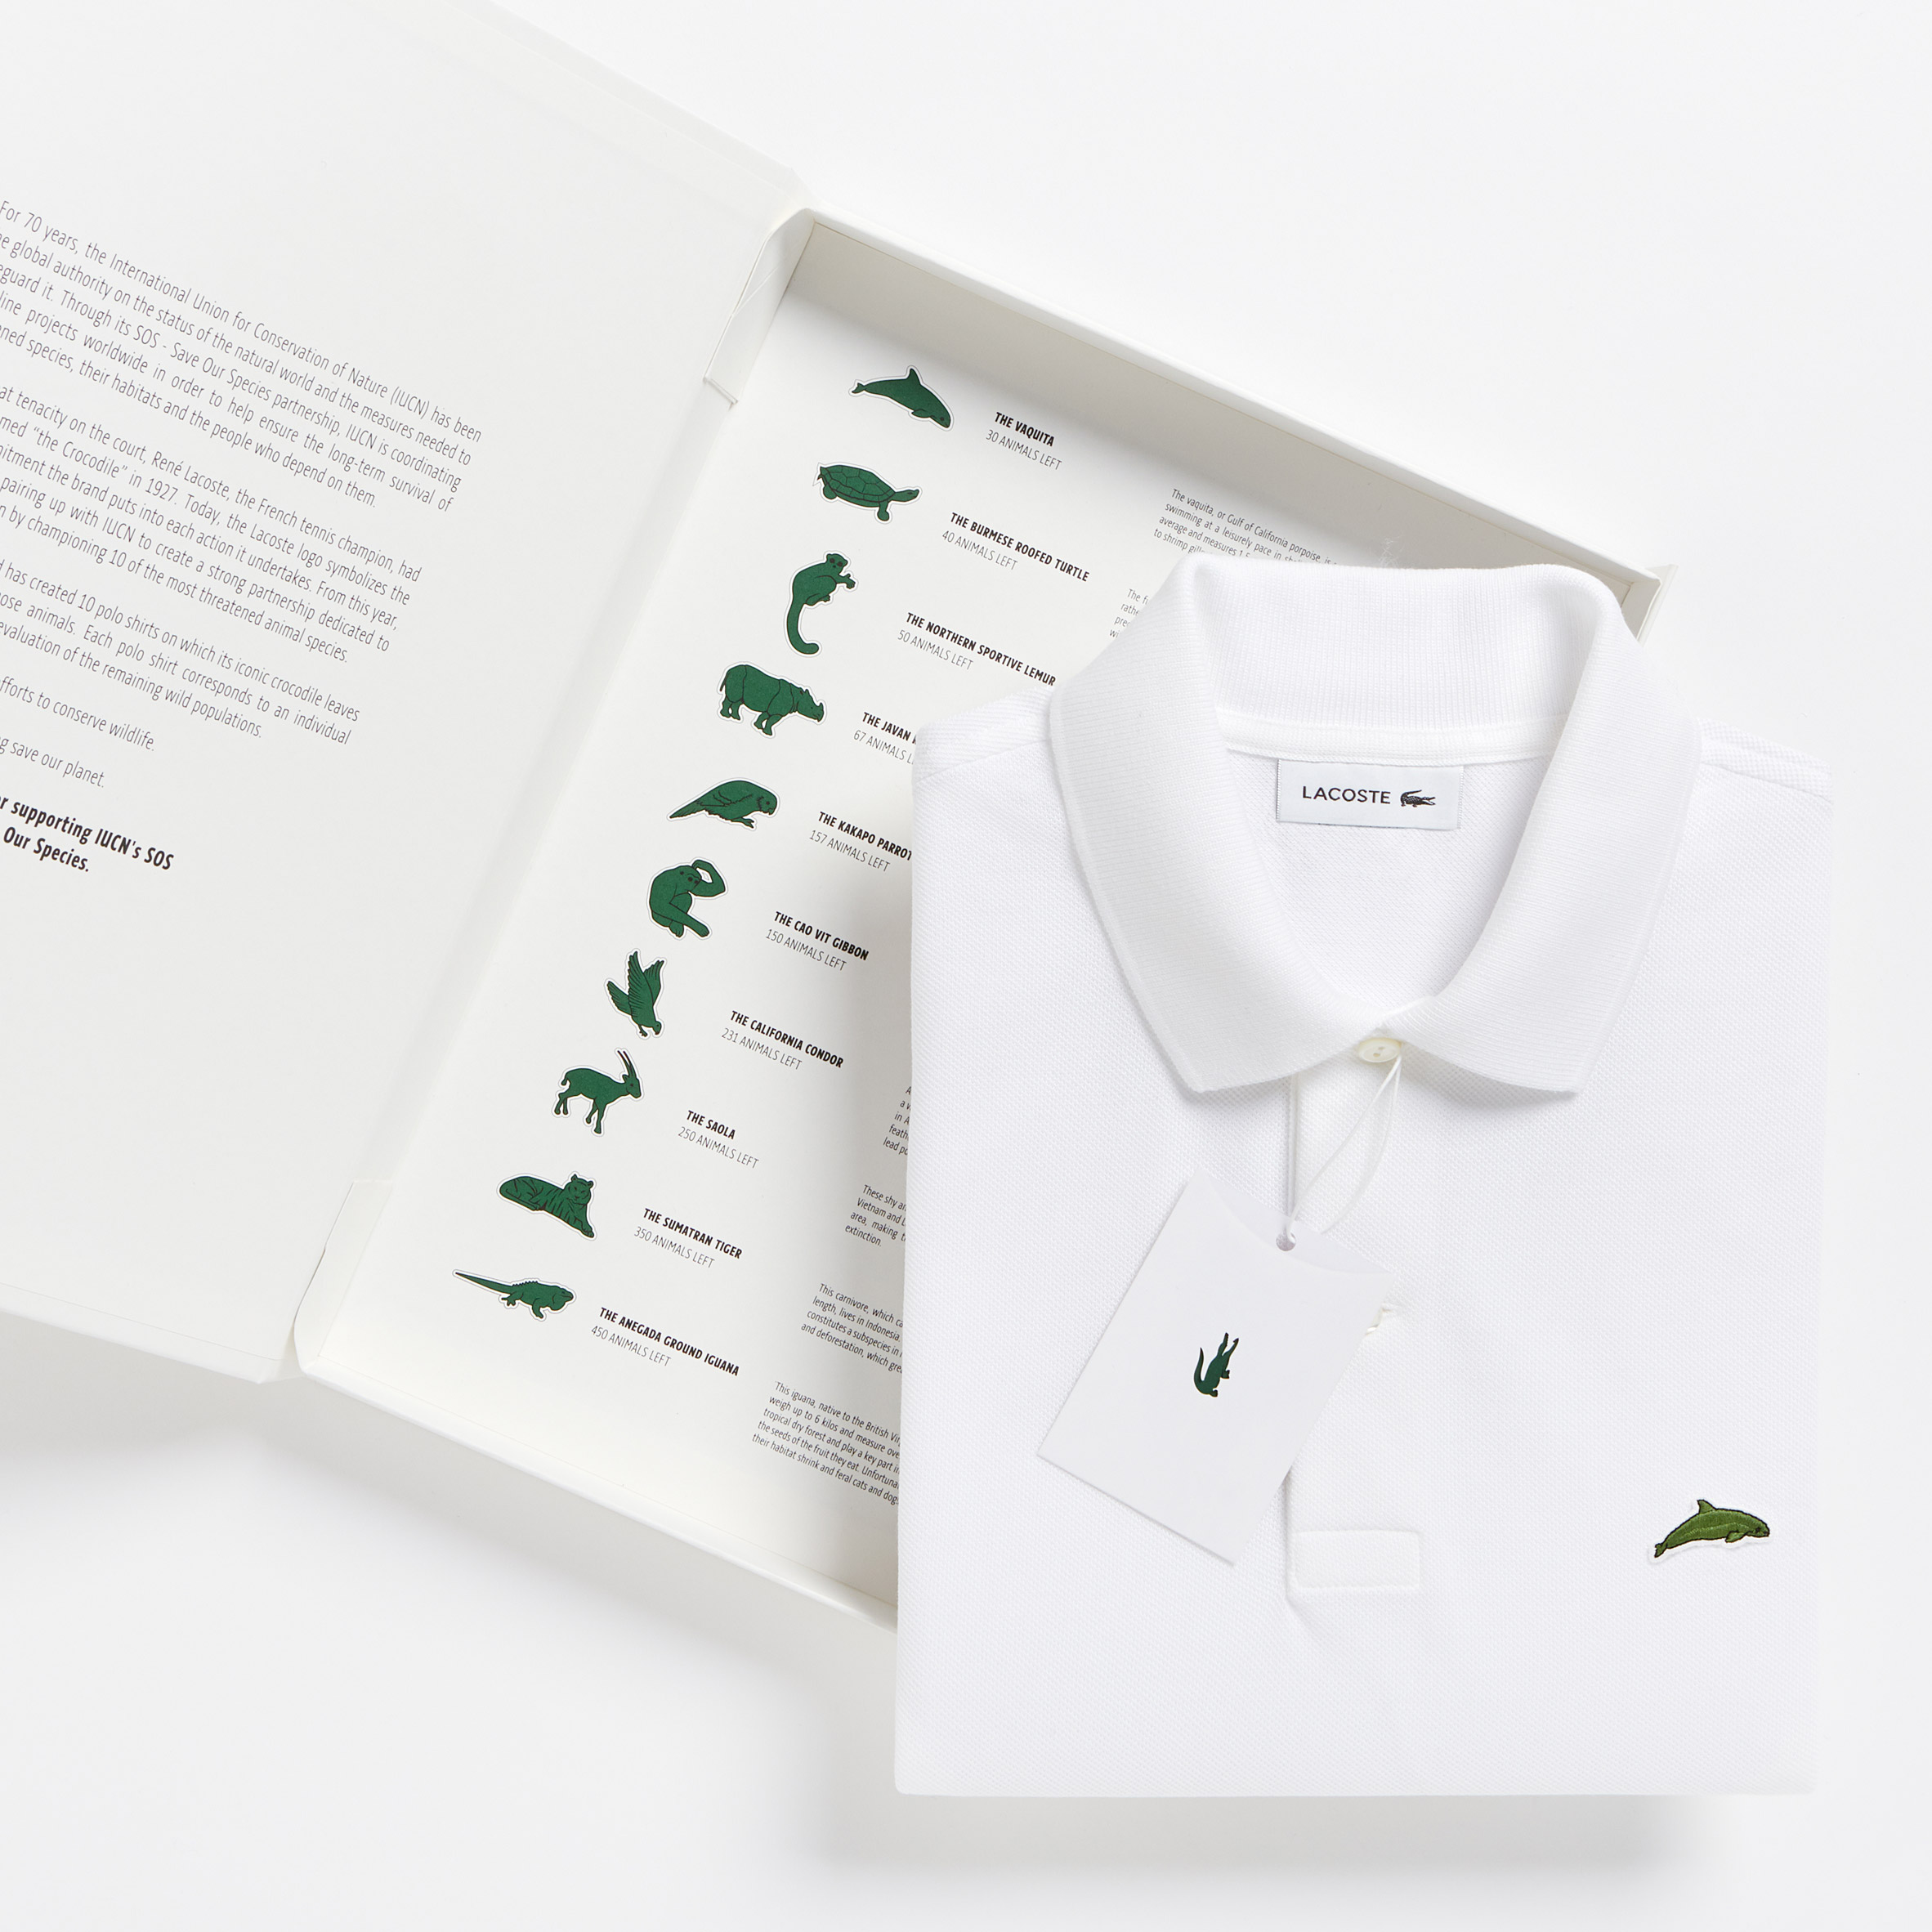 Ni systematisk Harmoni Lacoste crocodile logo replaced by endangered species